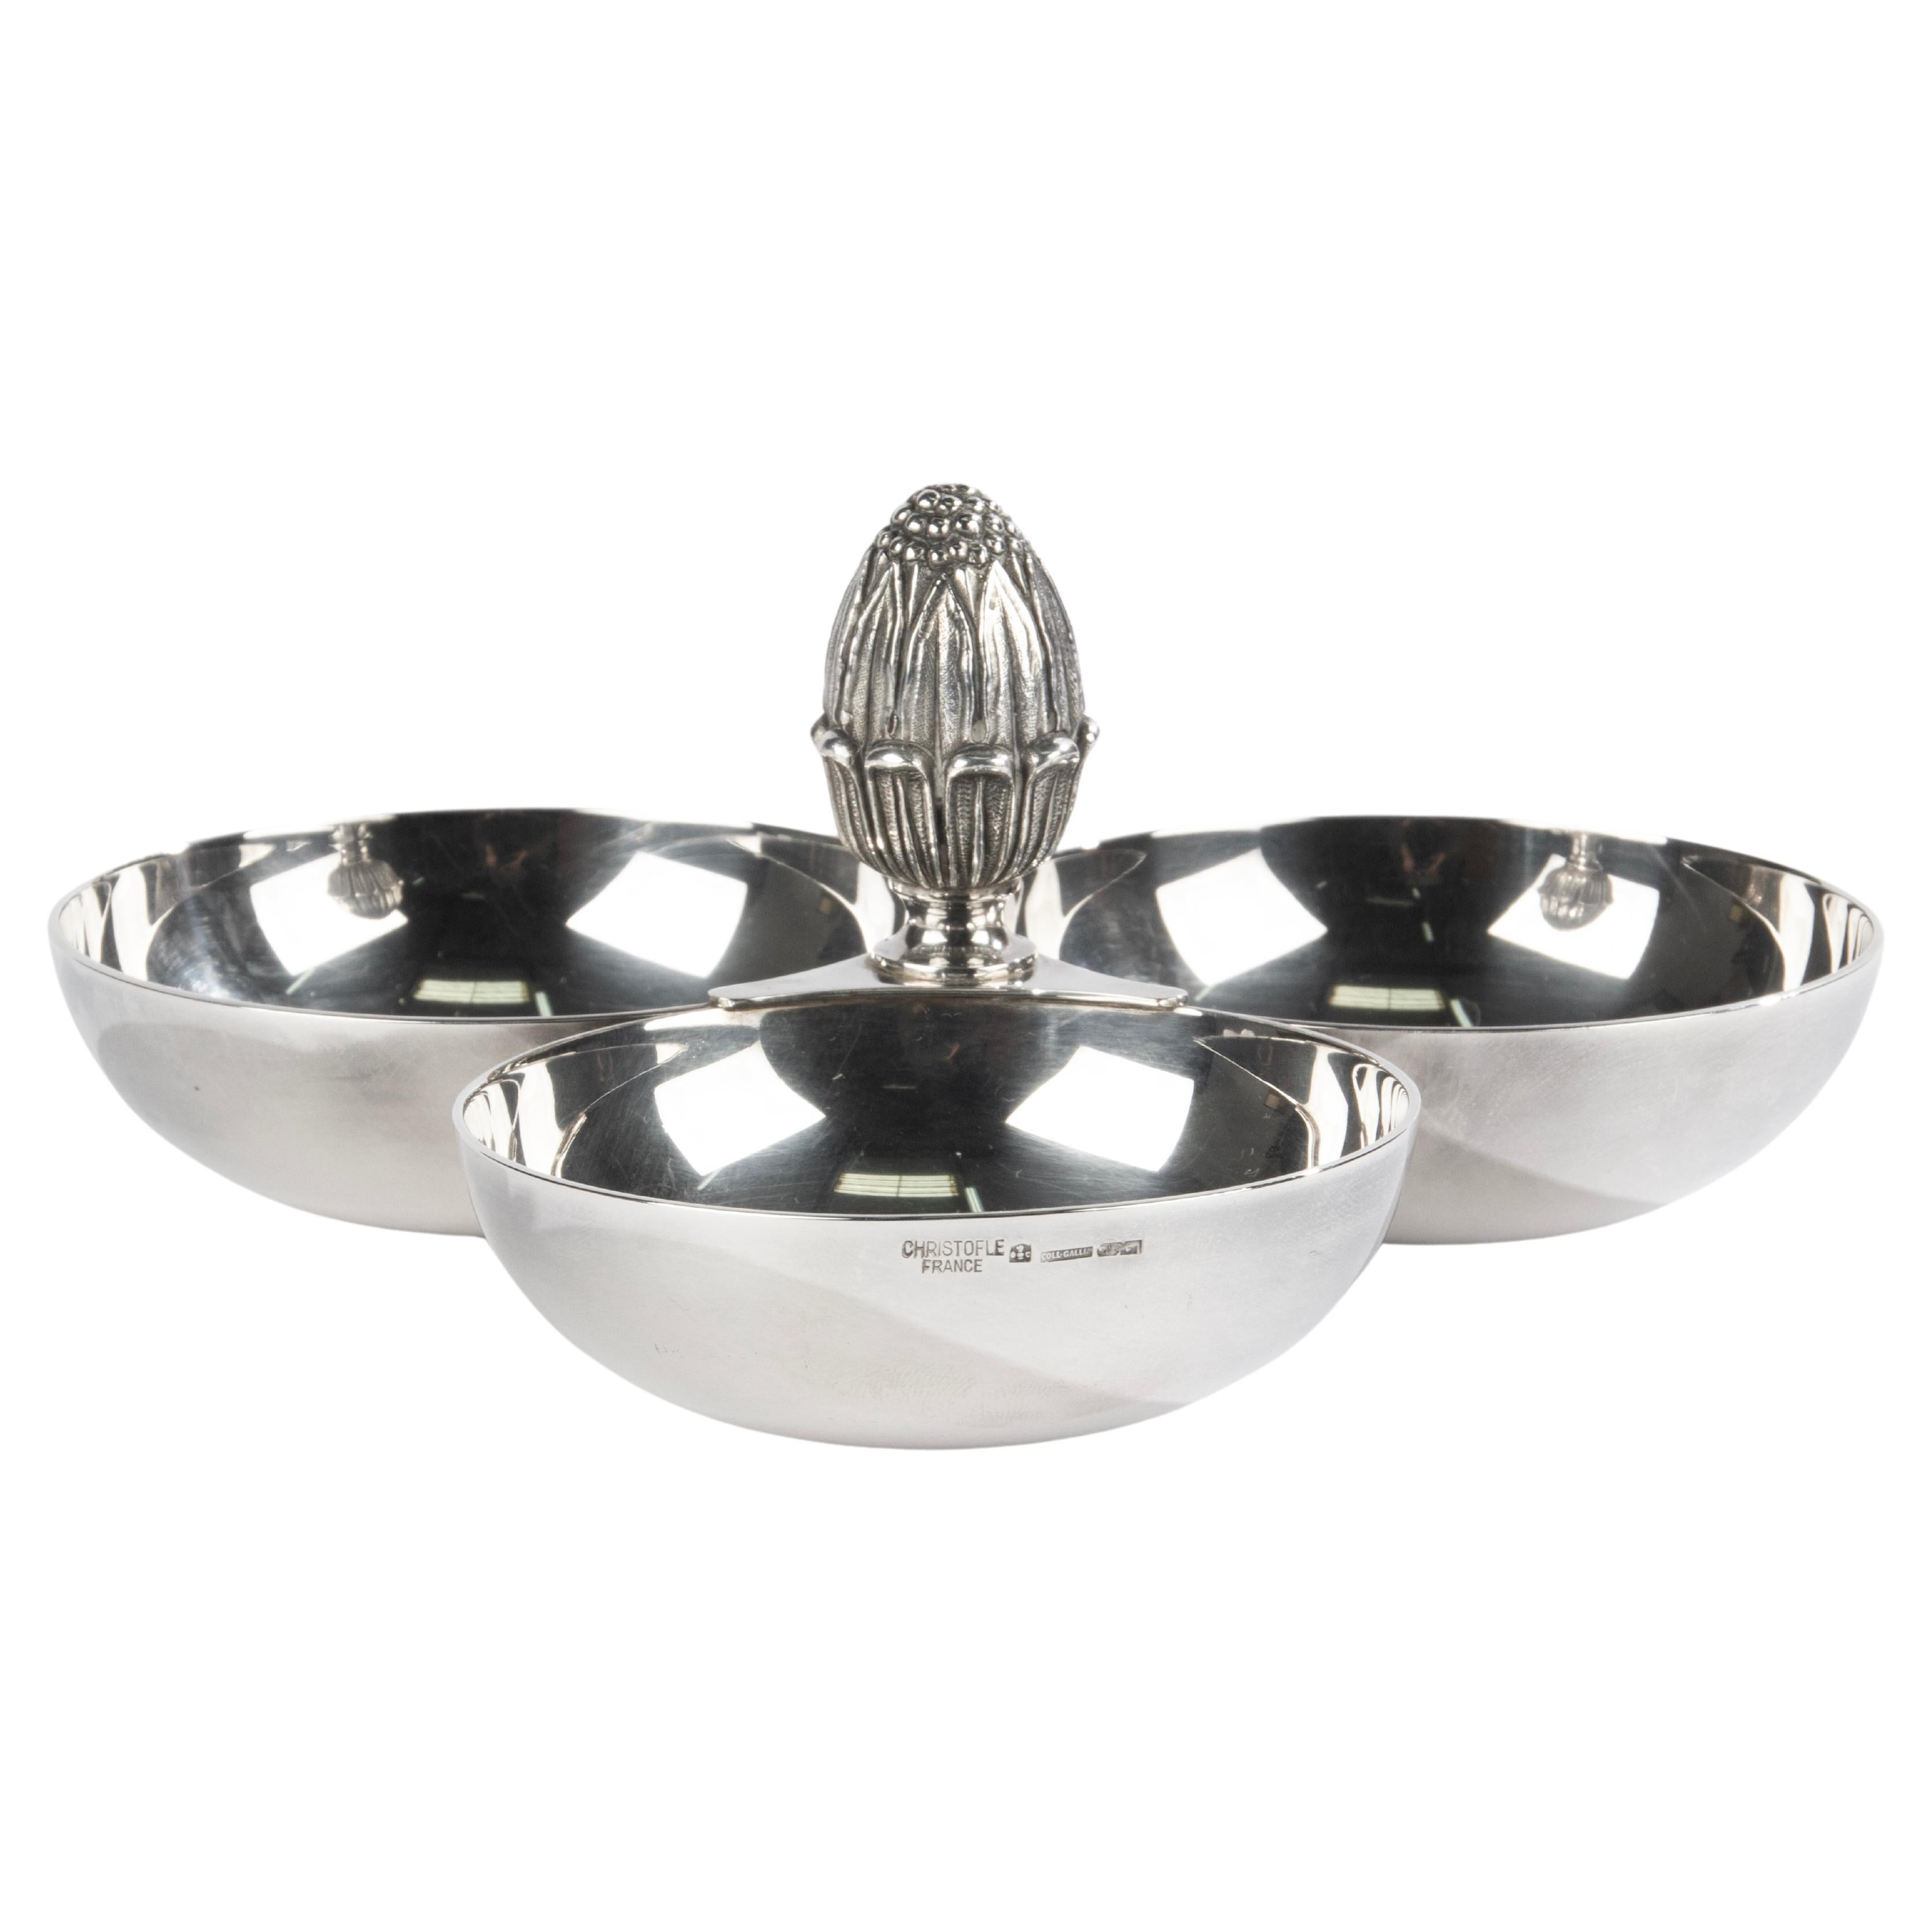 Silver Plated Serving Bowl - Christofle 